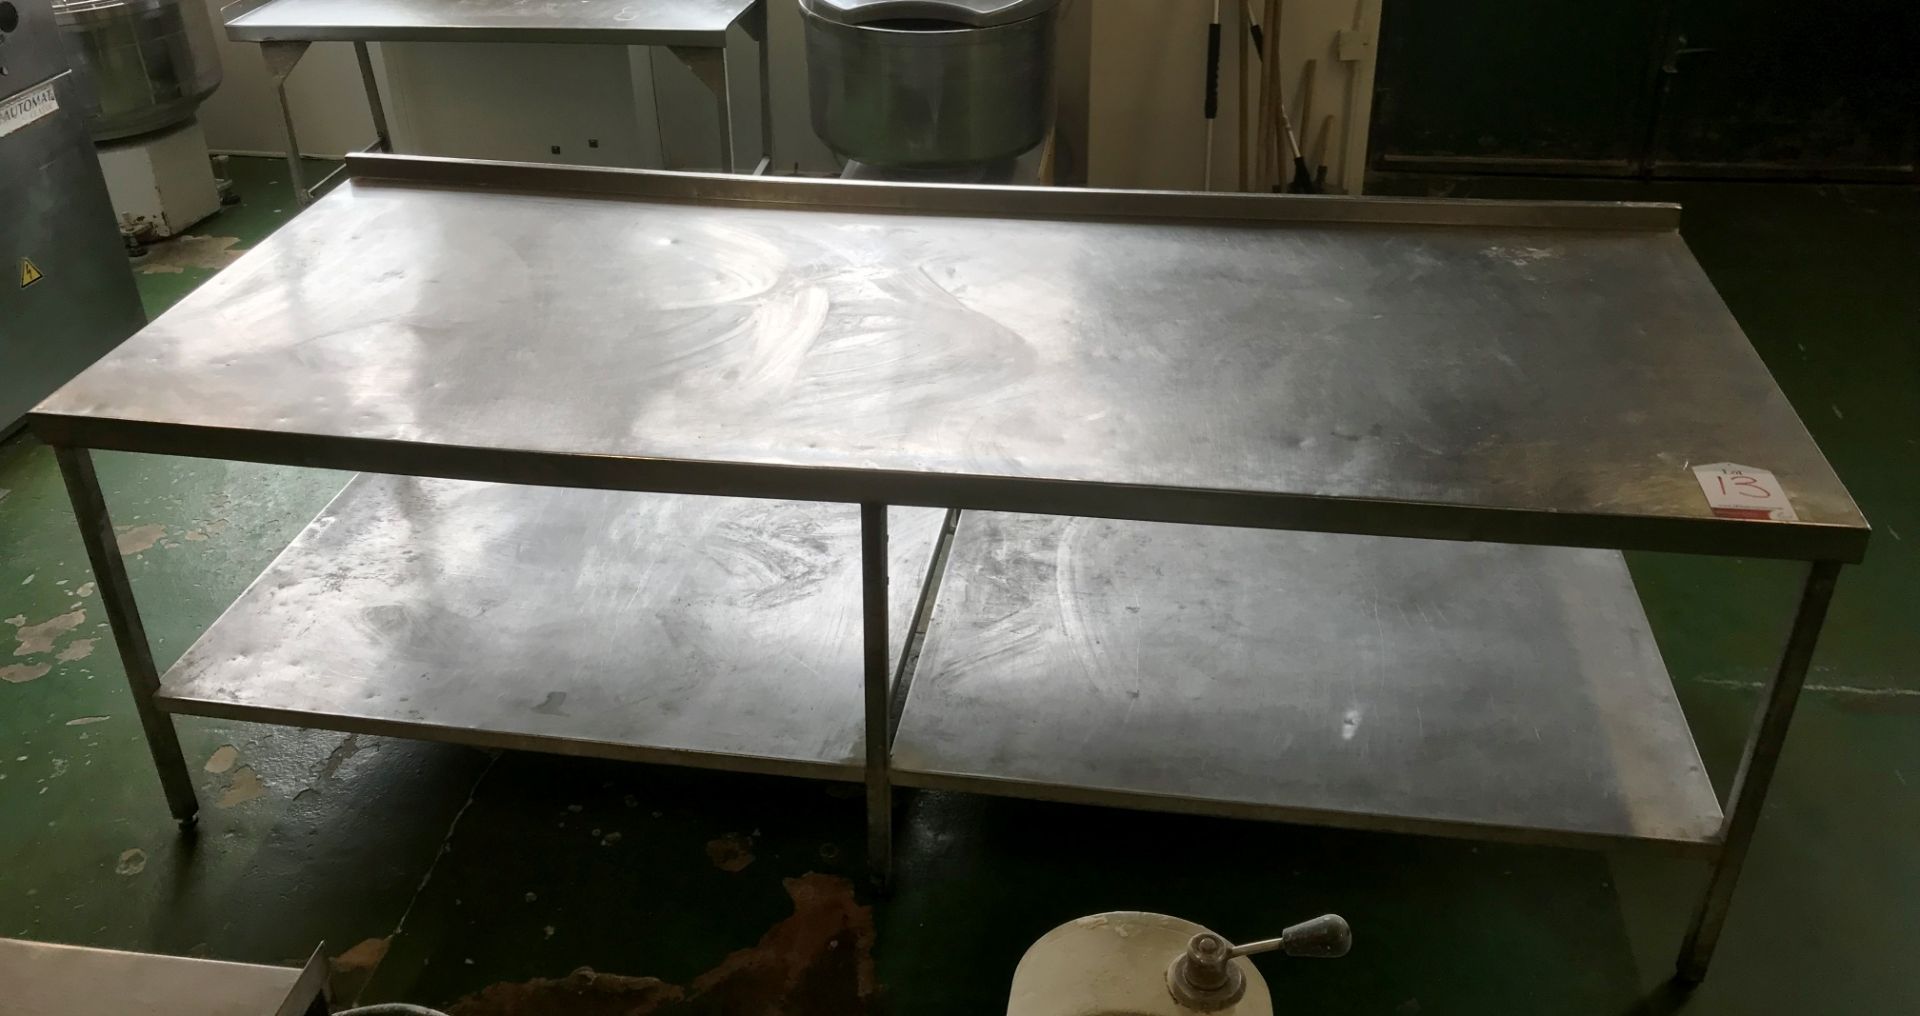 Stainless Steel Preparation Table w/ Up-stand - 275cm L x 109cm D x 89cm H - Image 2 of 2